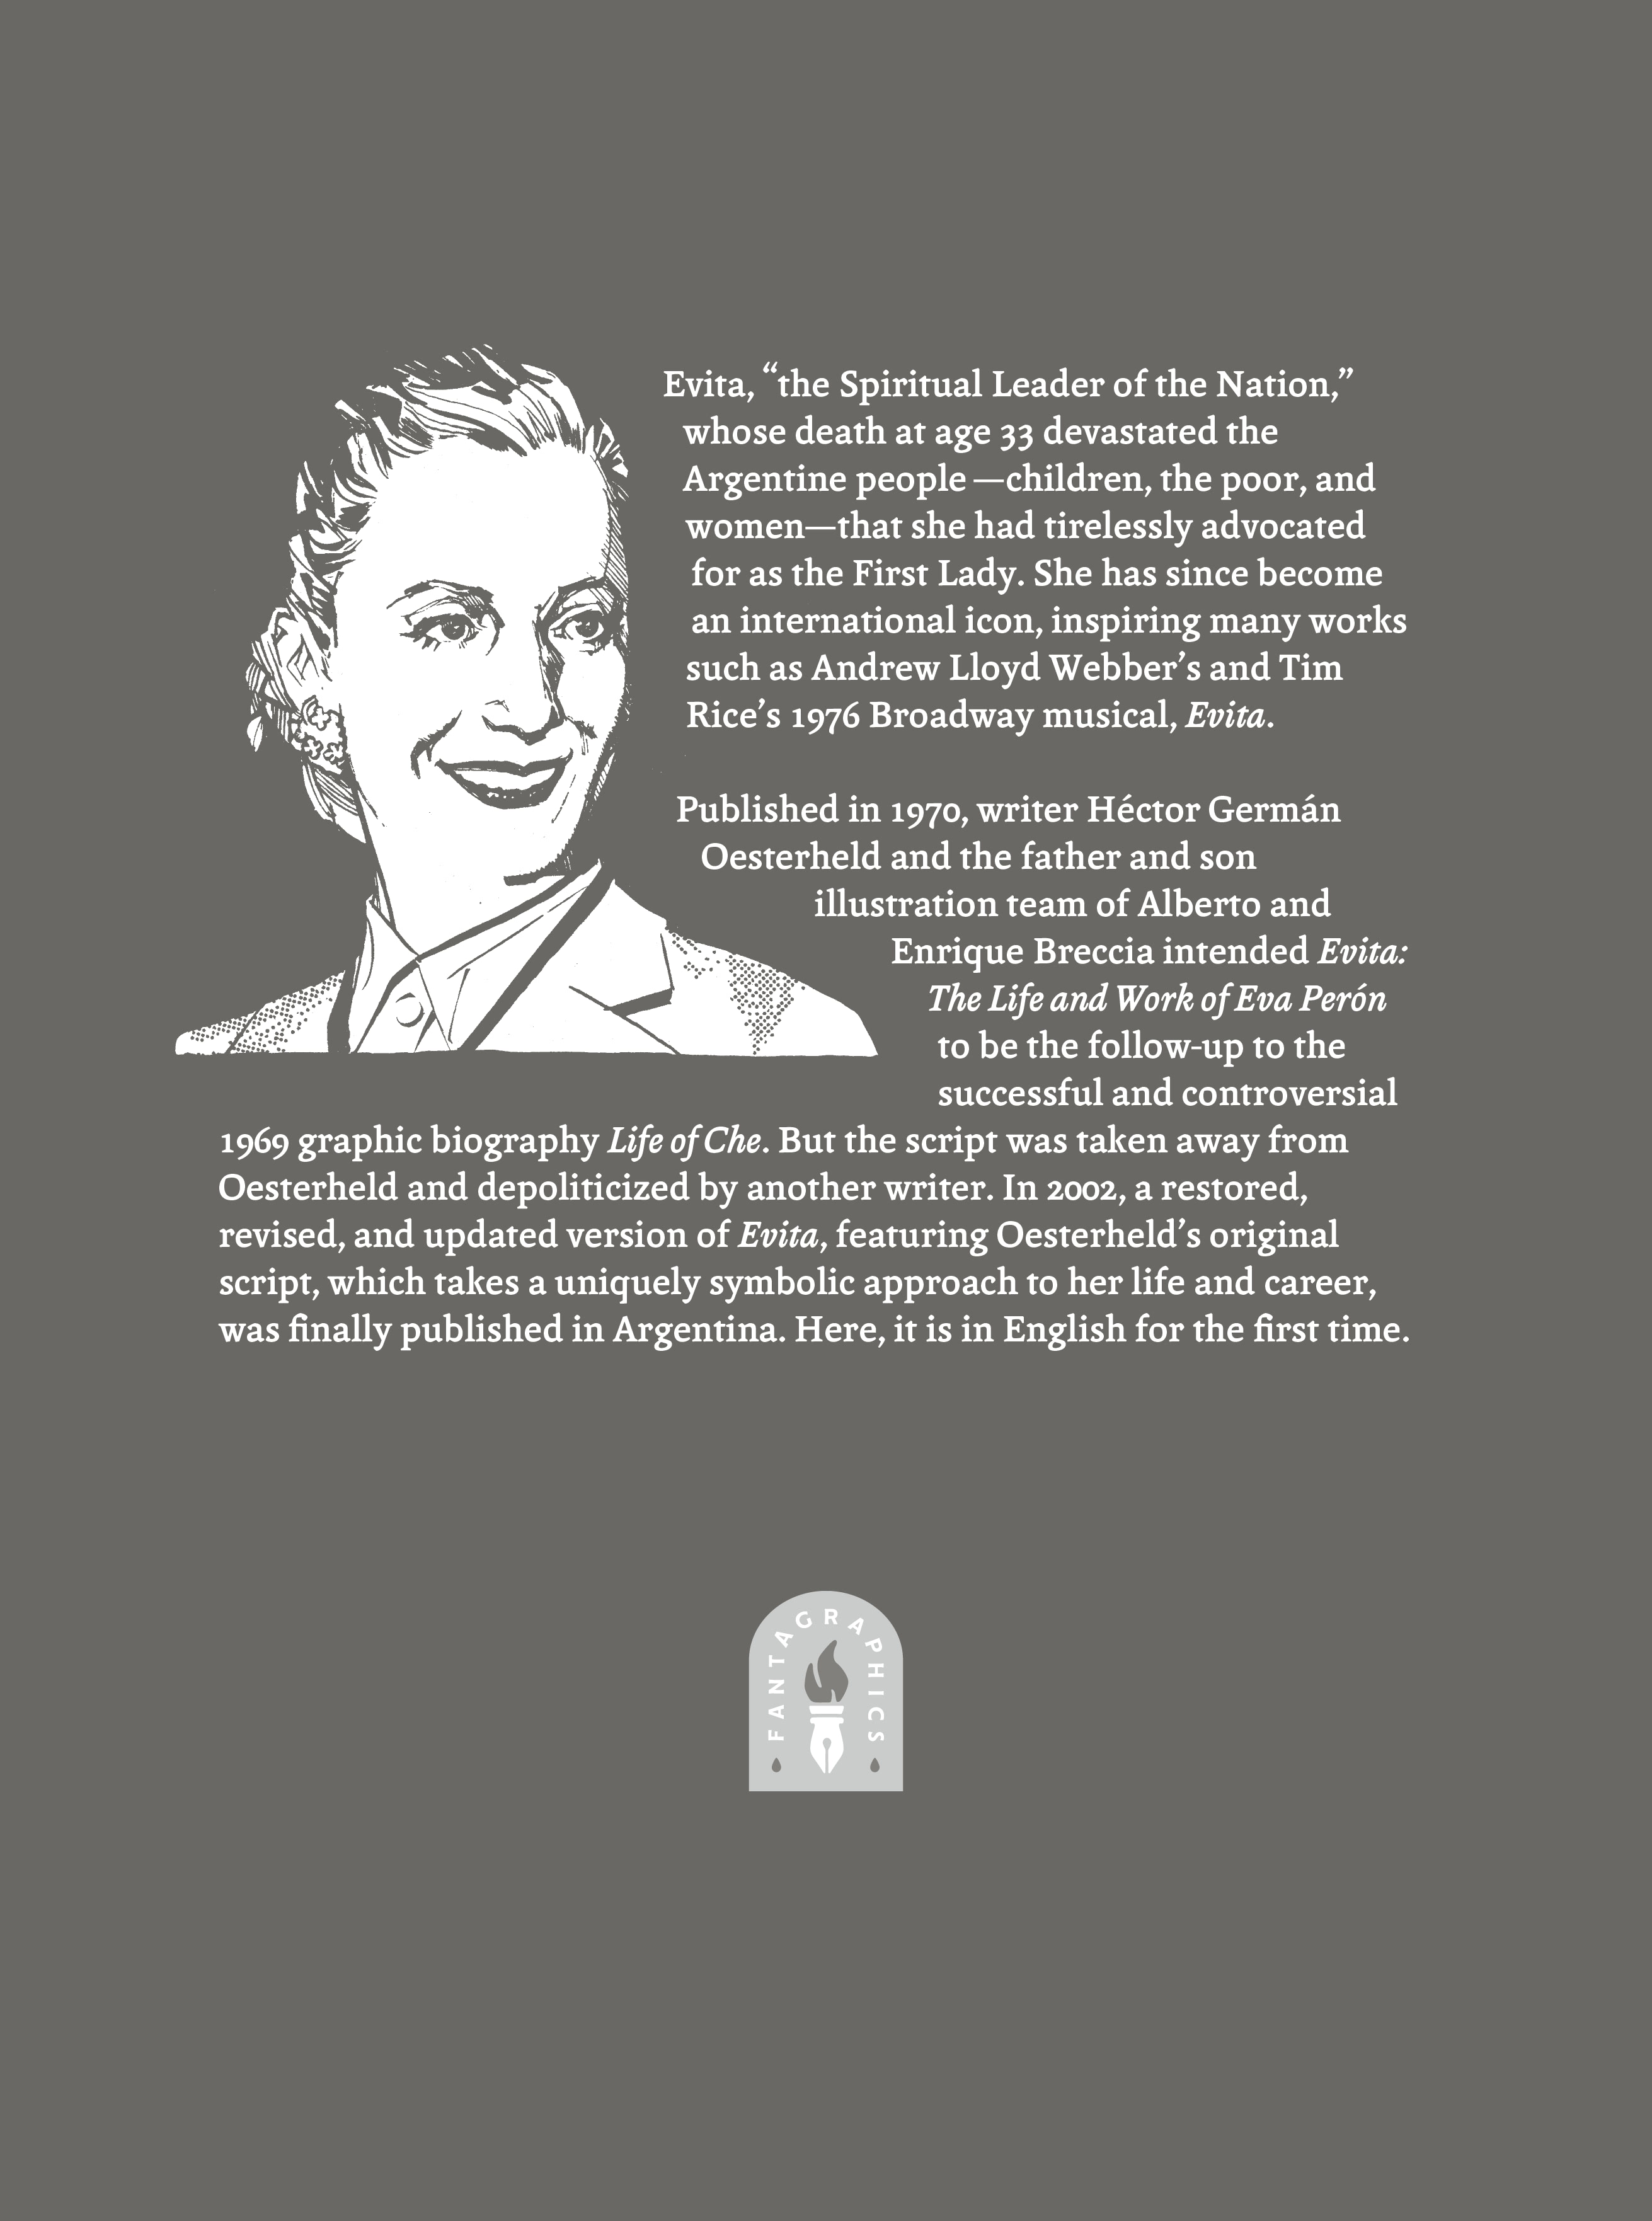 Read online Evita, the Life and Work of Eva Perón comic -  Issue # TPB - 74